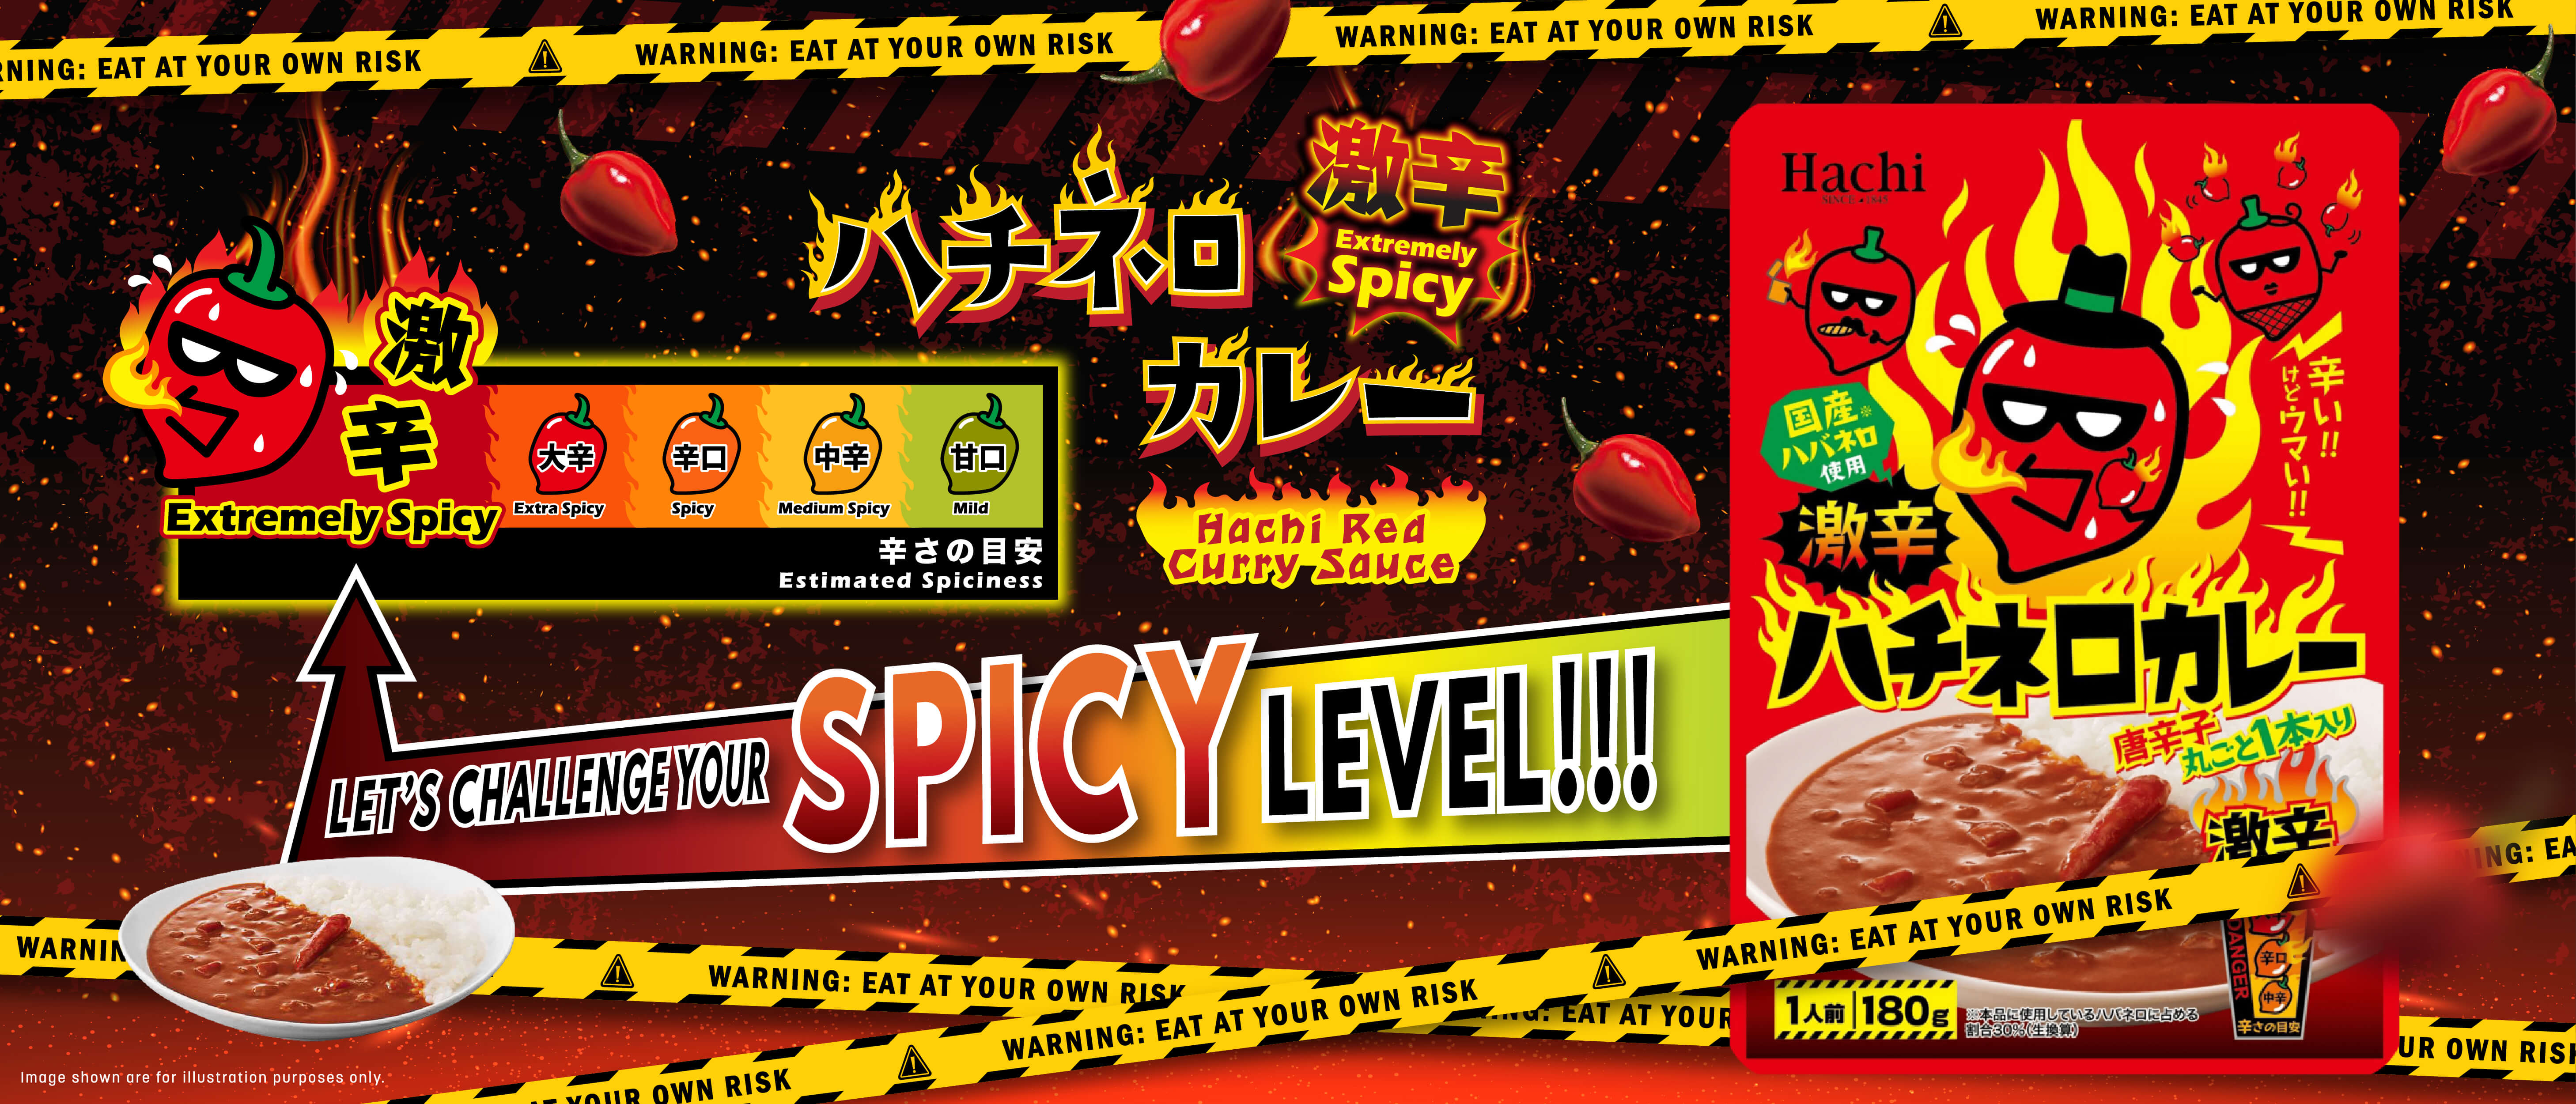 Hachi Red Curry Sauce